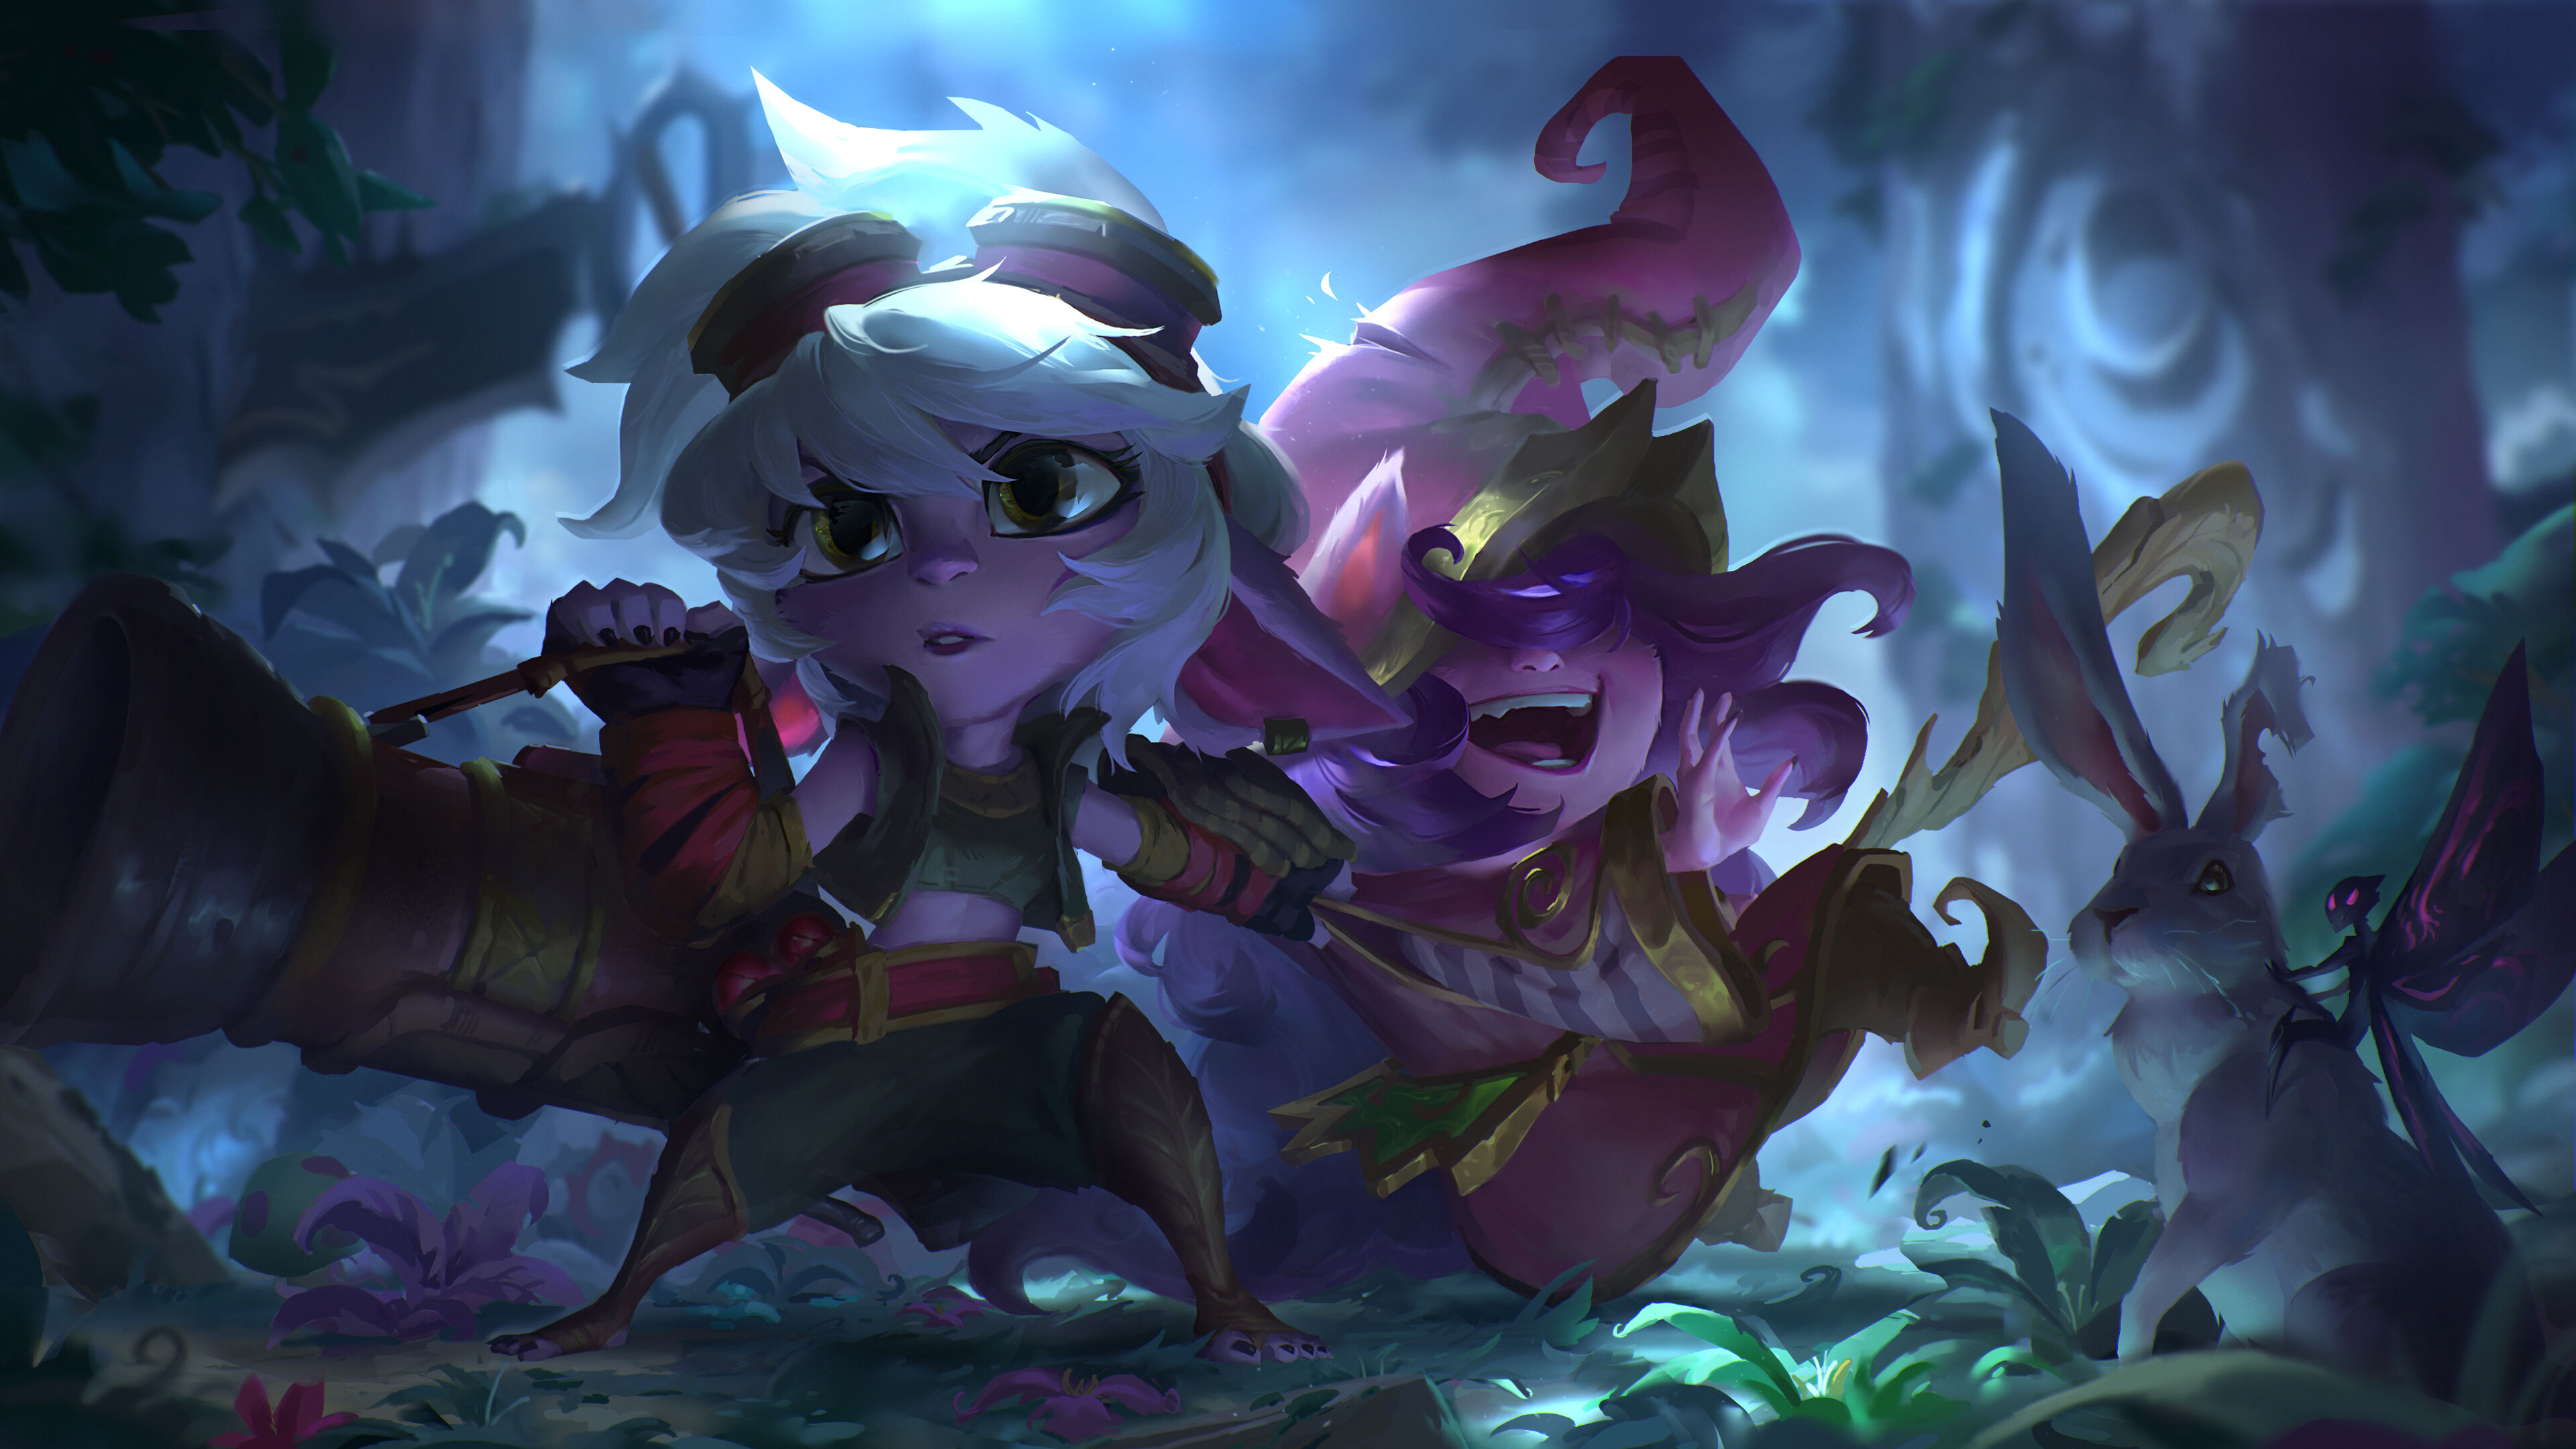 League of Legends - Lulu  League of legends lulu, Lulu and veigar, League  of legends